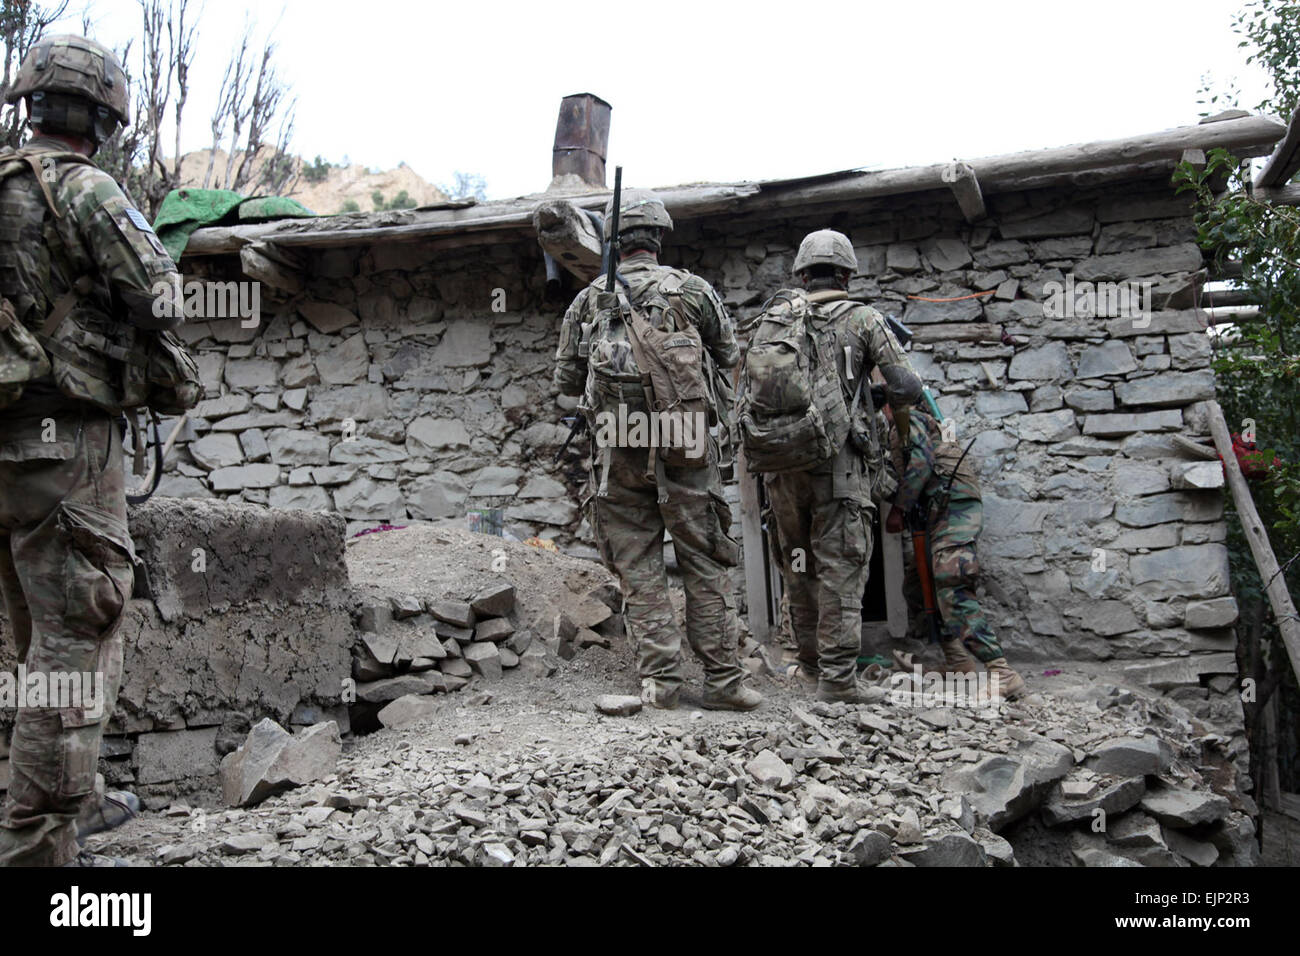 U.S. Army soldiers from B Troop, 6th Squadron, 4th Cavalry Regiment, 3rd Brigade Combat Team, Task Force Duke enter a house to search it during Operation Tofan 2 in Suri Khel, Afghanistan, Sept. 15, 2011. The mission objective was to clear insurgents from the town of Suri Khel and prevent them from returning. Stock Photo